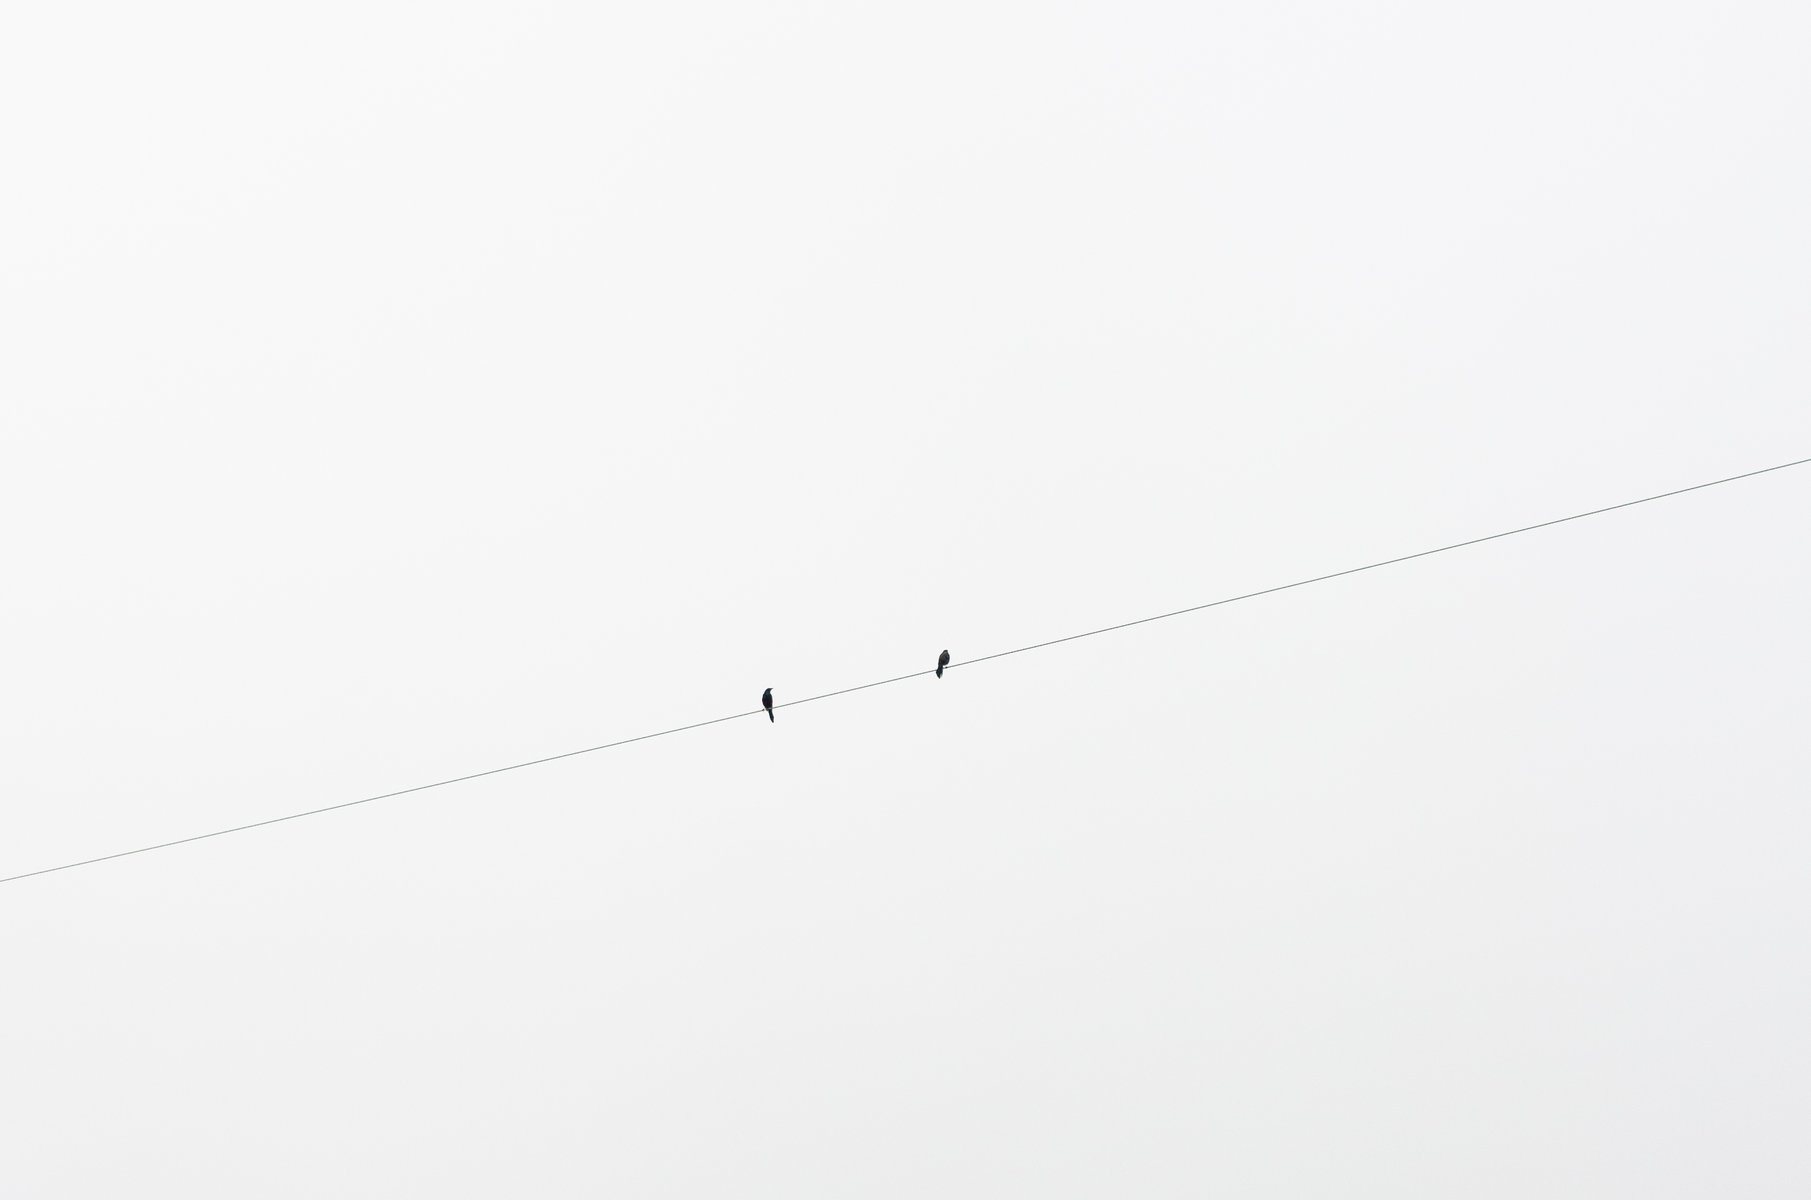  Personal Work
A black and white image of two small birds sitting on an electrical wire against a bright, overcast sky. by Sydney SG